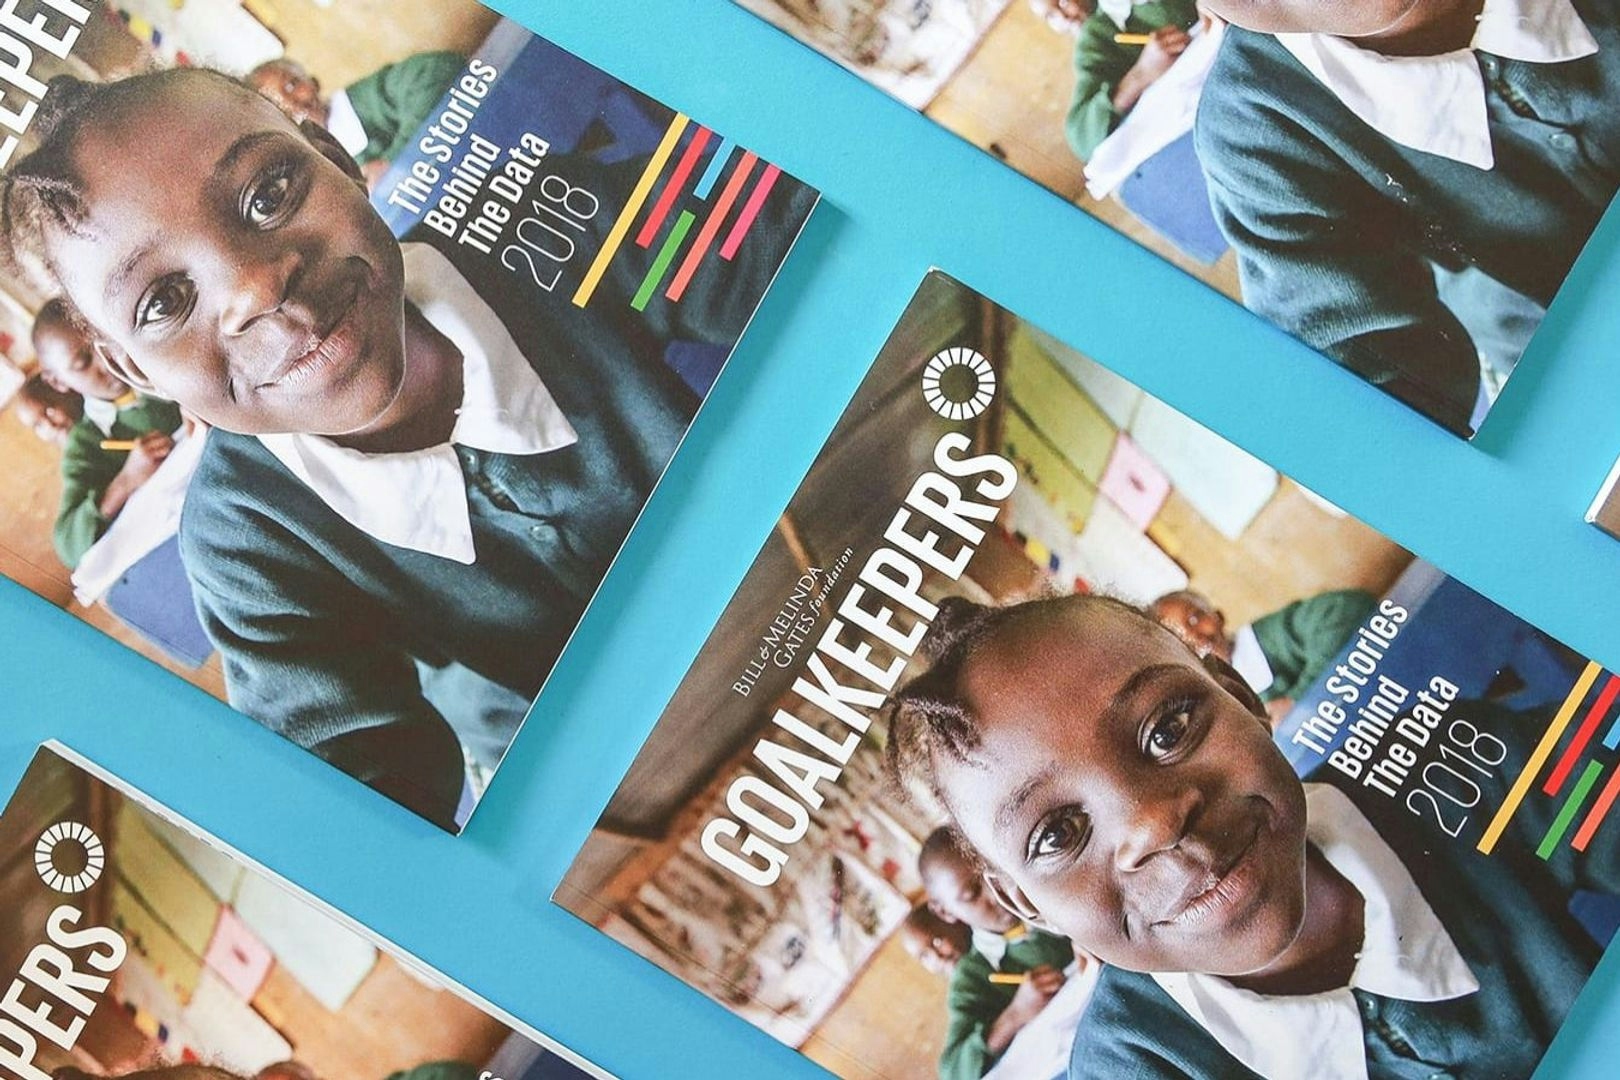 Multiple copies of the Goalkeepers 2018 report laid out side by side over a bright blue background. The cover is titled 'Goalkeepers' with the image of a schoolgirl smiling into the camera.